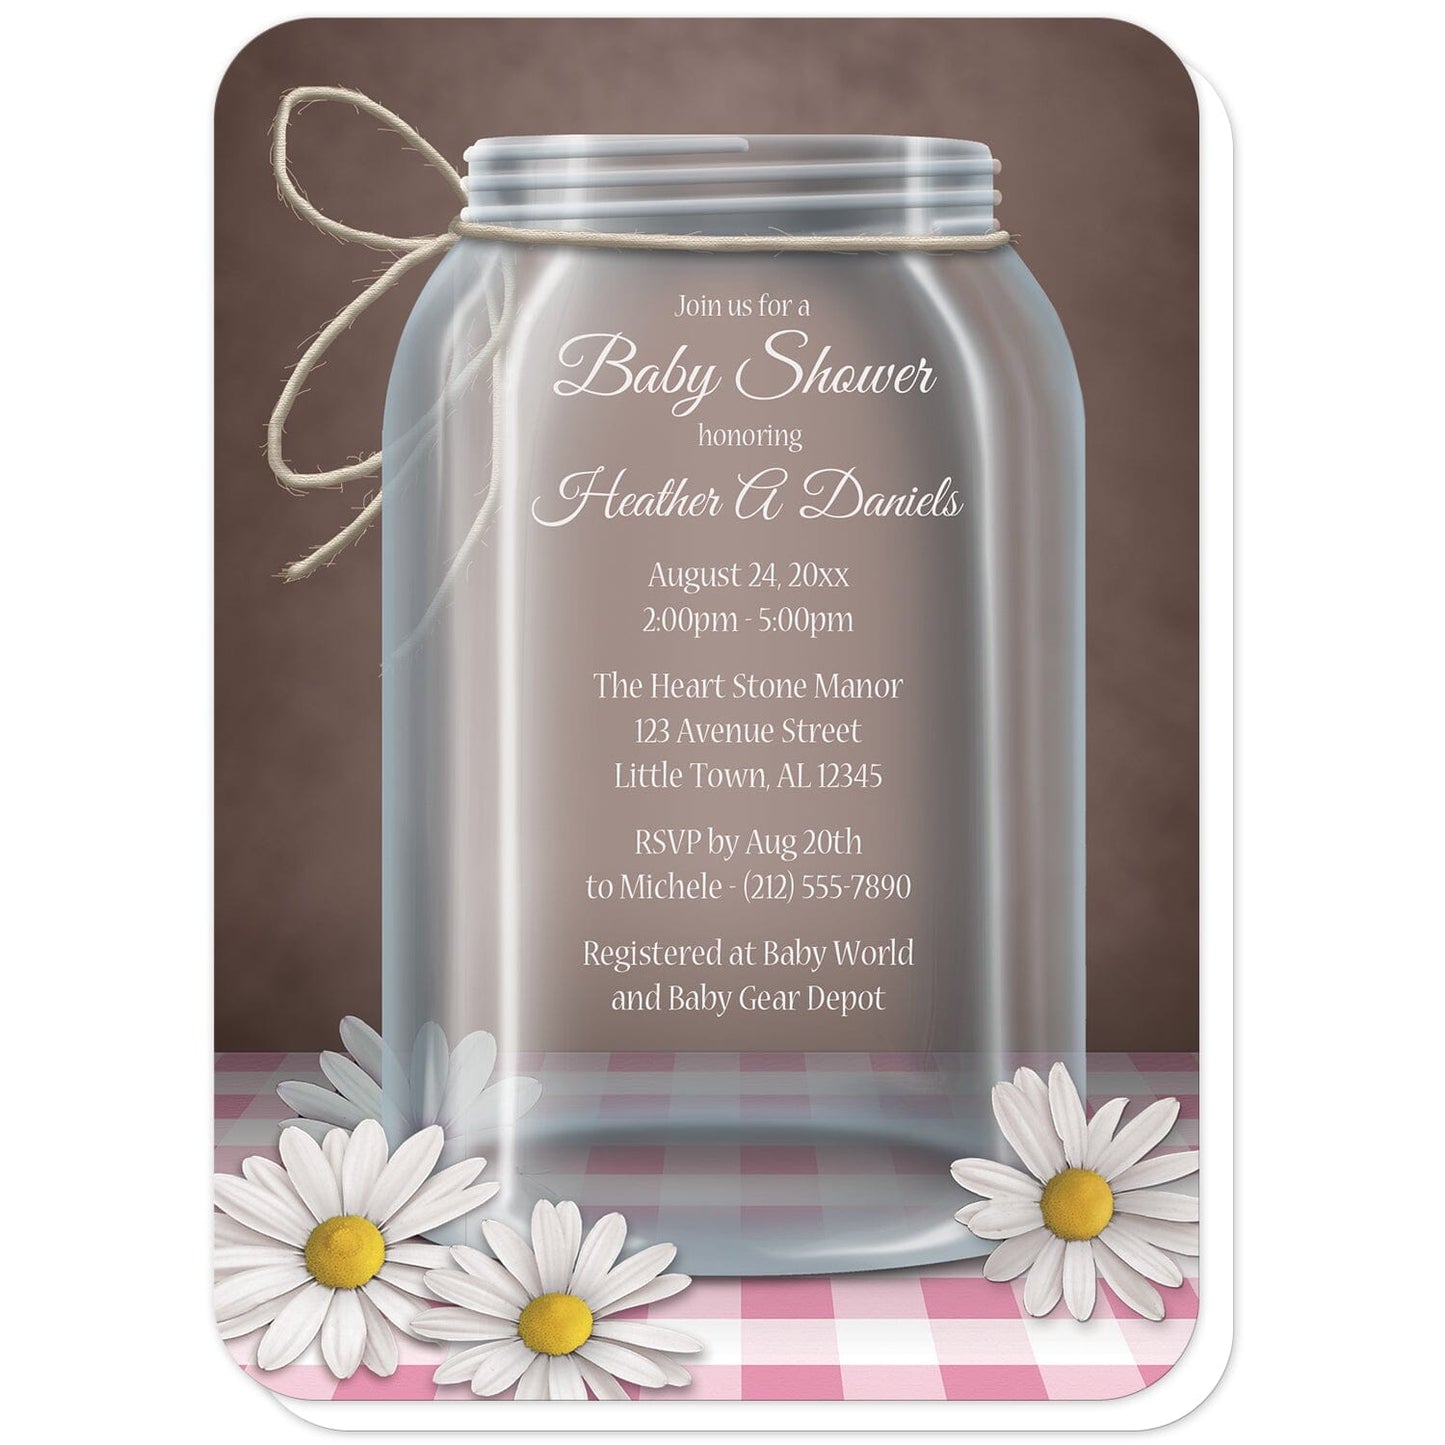 Country Mason Jar Daisy Gingham Baby Shower Invitations (with rounded corners) at Artistically Invited. Country mason jar daisy gingham baby shower invitations with an illustration of a glass mason jar with twine tied around the neck of it, and white and yellow daisies laying at the base of the jar on a pink gingham tabletop and over a vintage brown background. Your personalized baby shower celebration details are custom printed in white within the mason jar illustration.